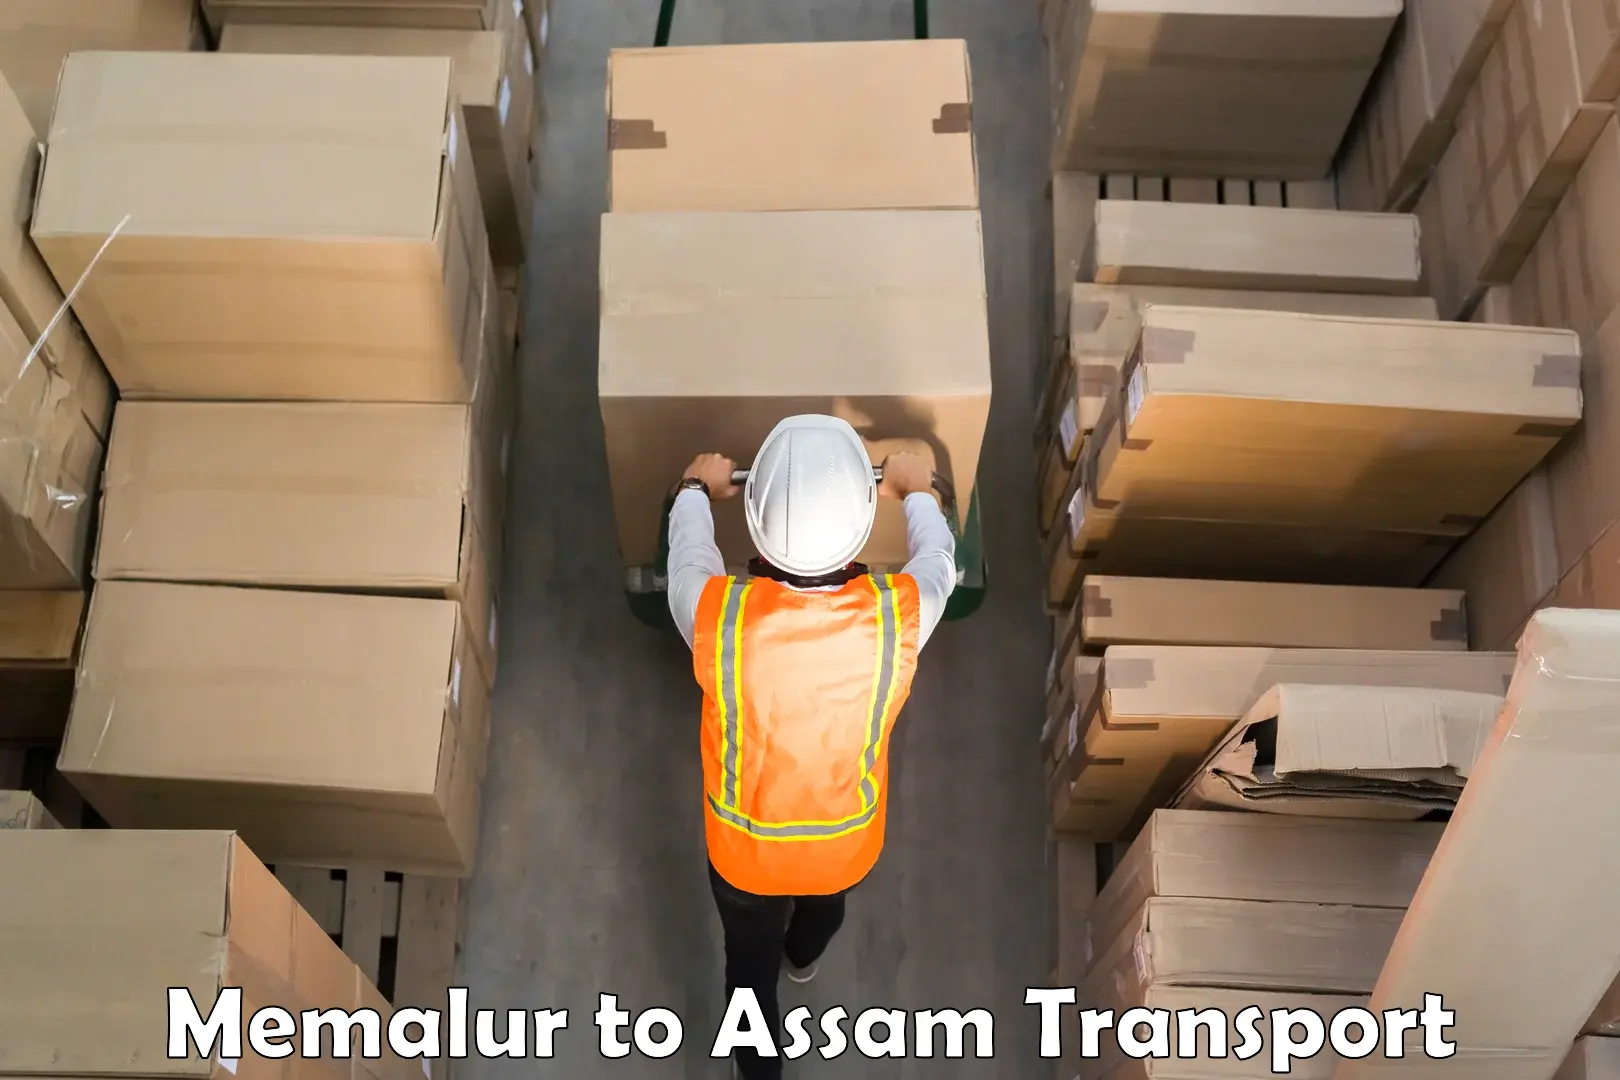 Container transportation services Memalur to Lala Assam